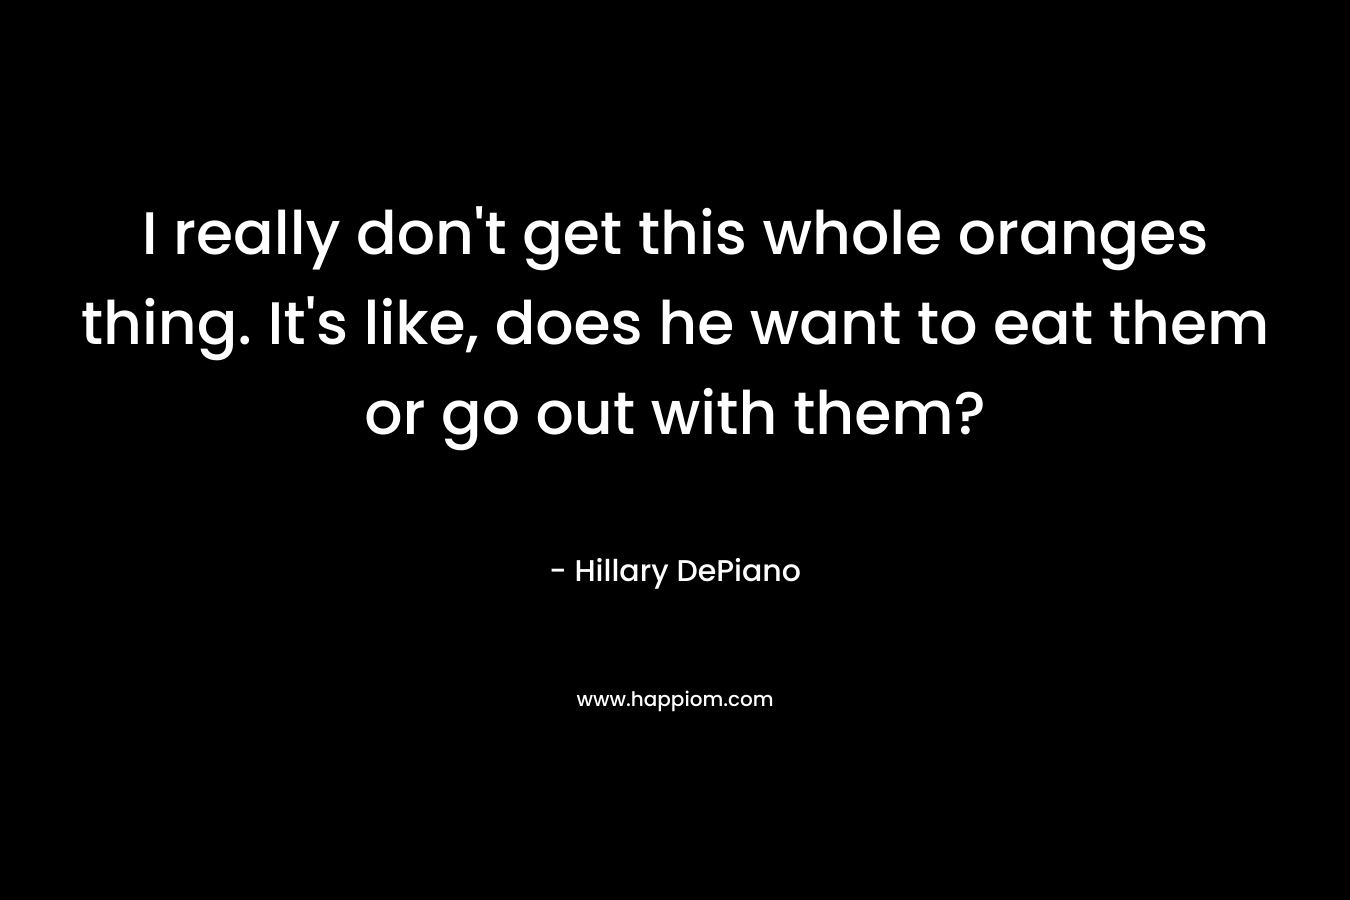 I really don’t get this whole oranges thing. It’s like, does he want to eat them or go out with them? – Hillary DePiano